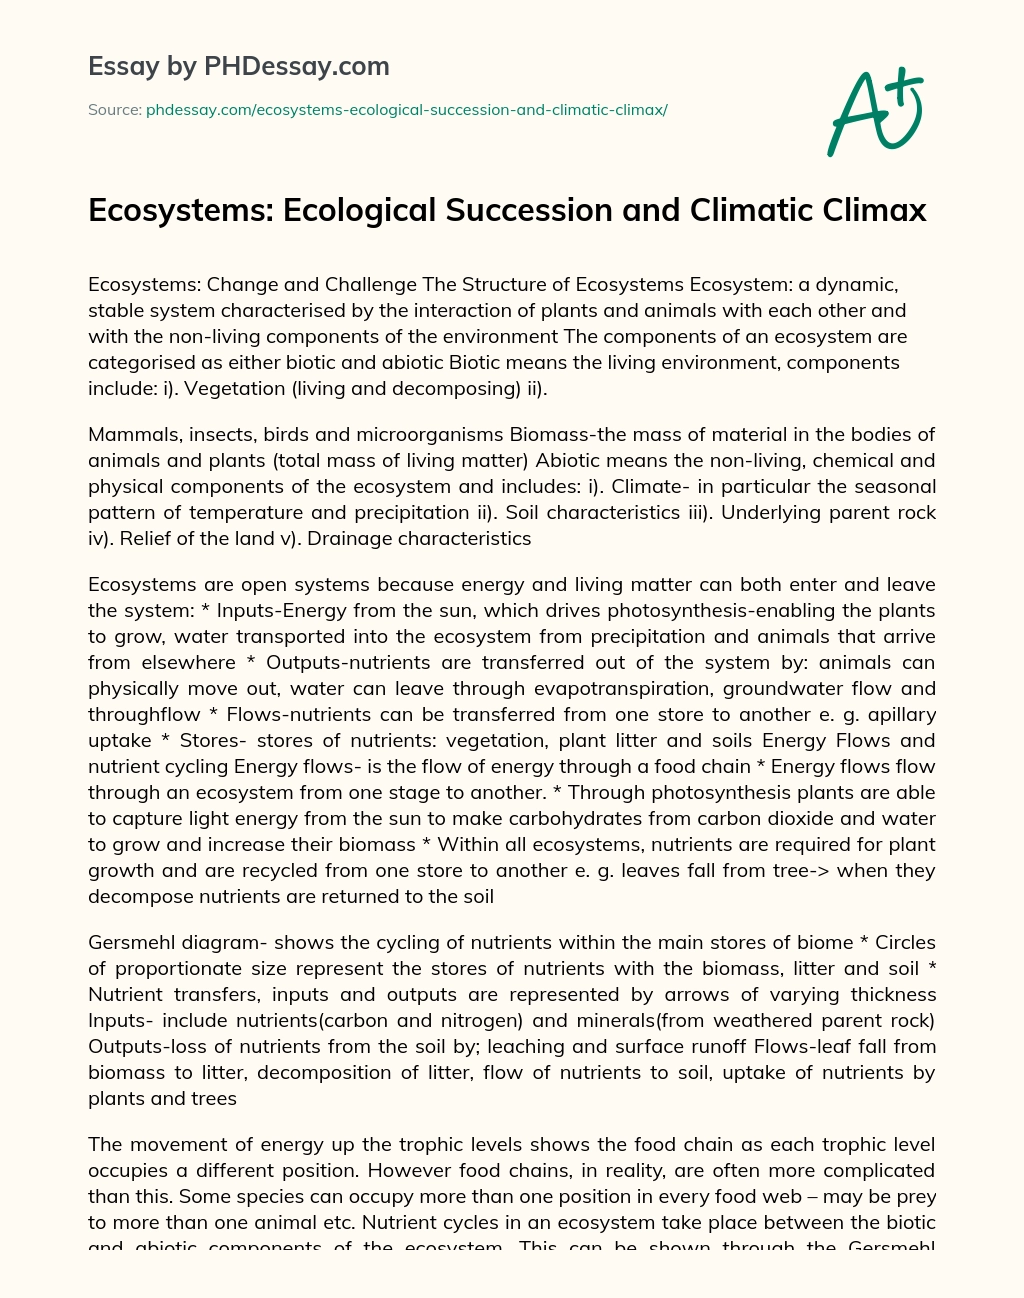 Ecosystems: Ecological Succession and Climatic Climax essay